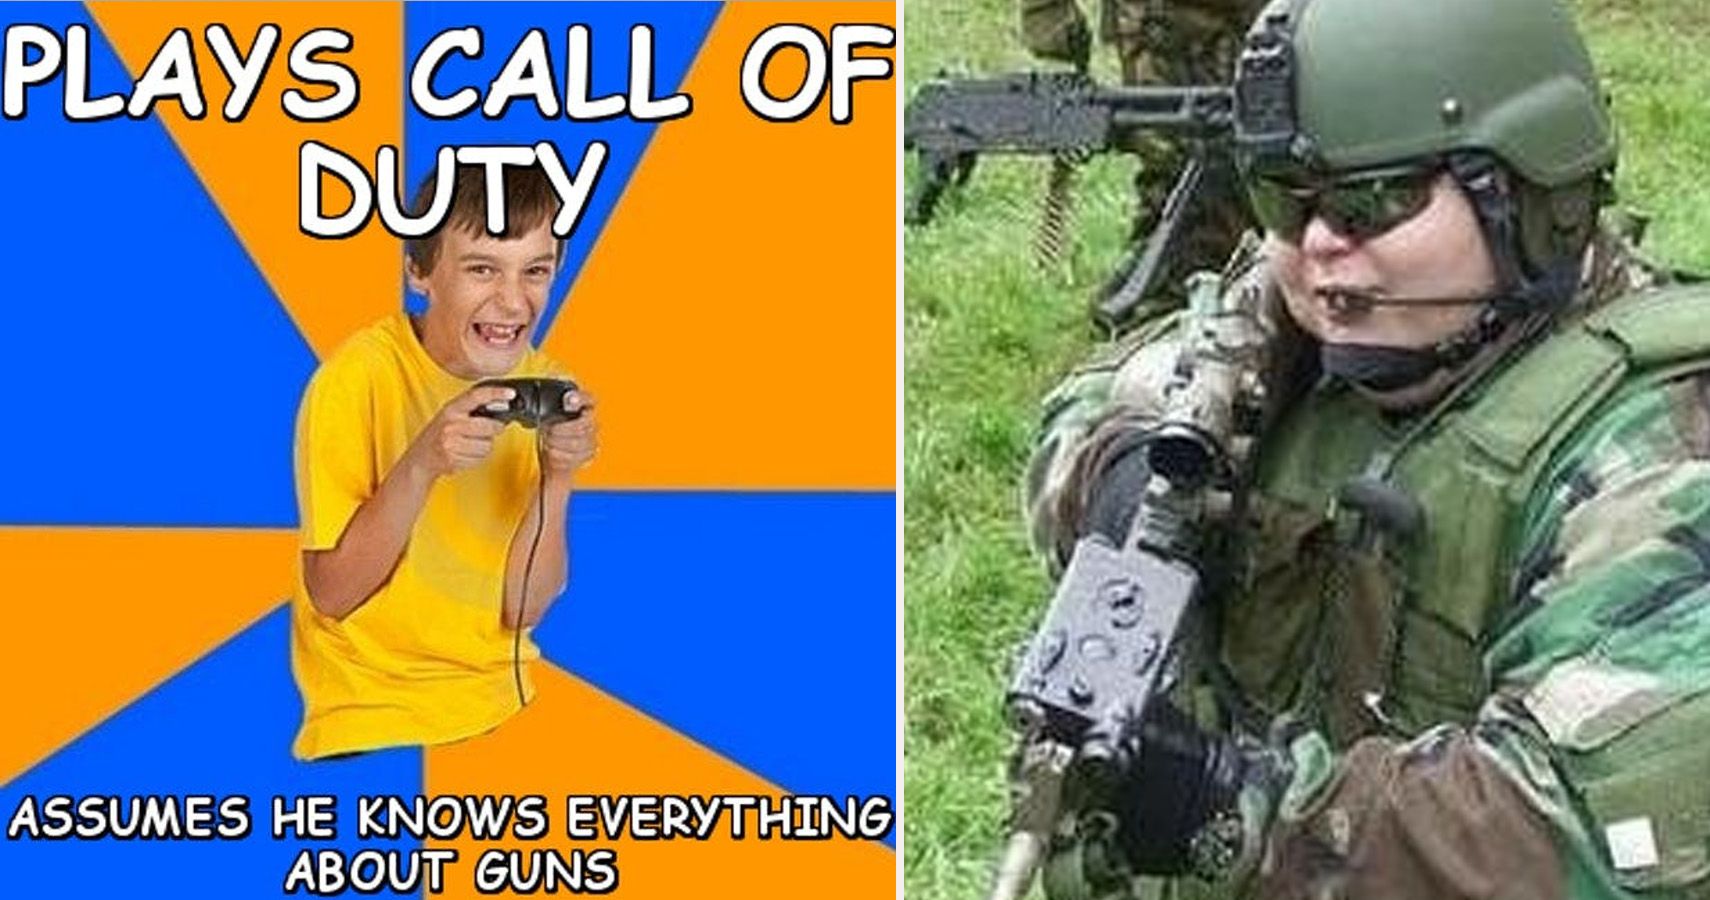 More Hilarious Call Of Duty Memes That Will Make Any Player Say 